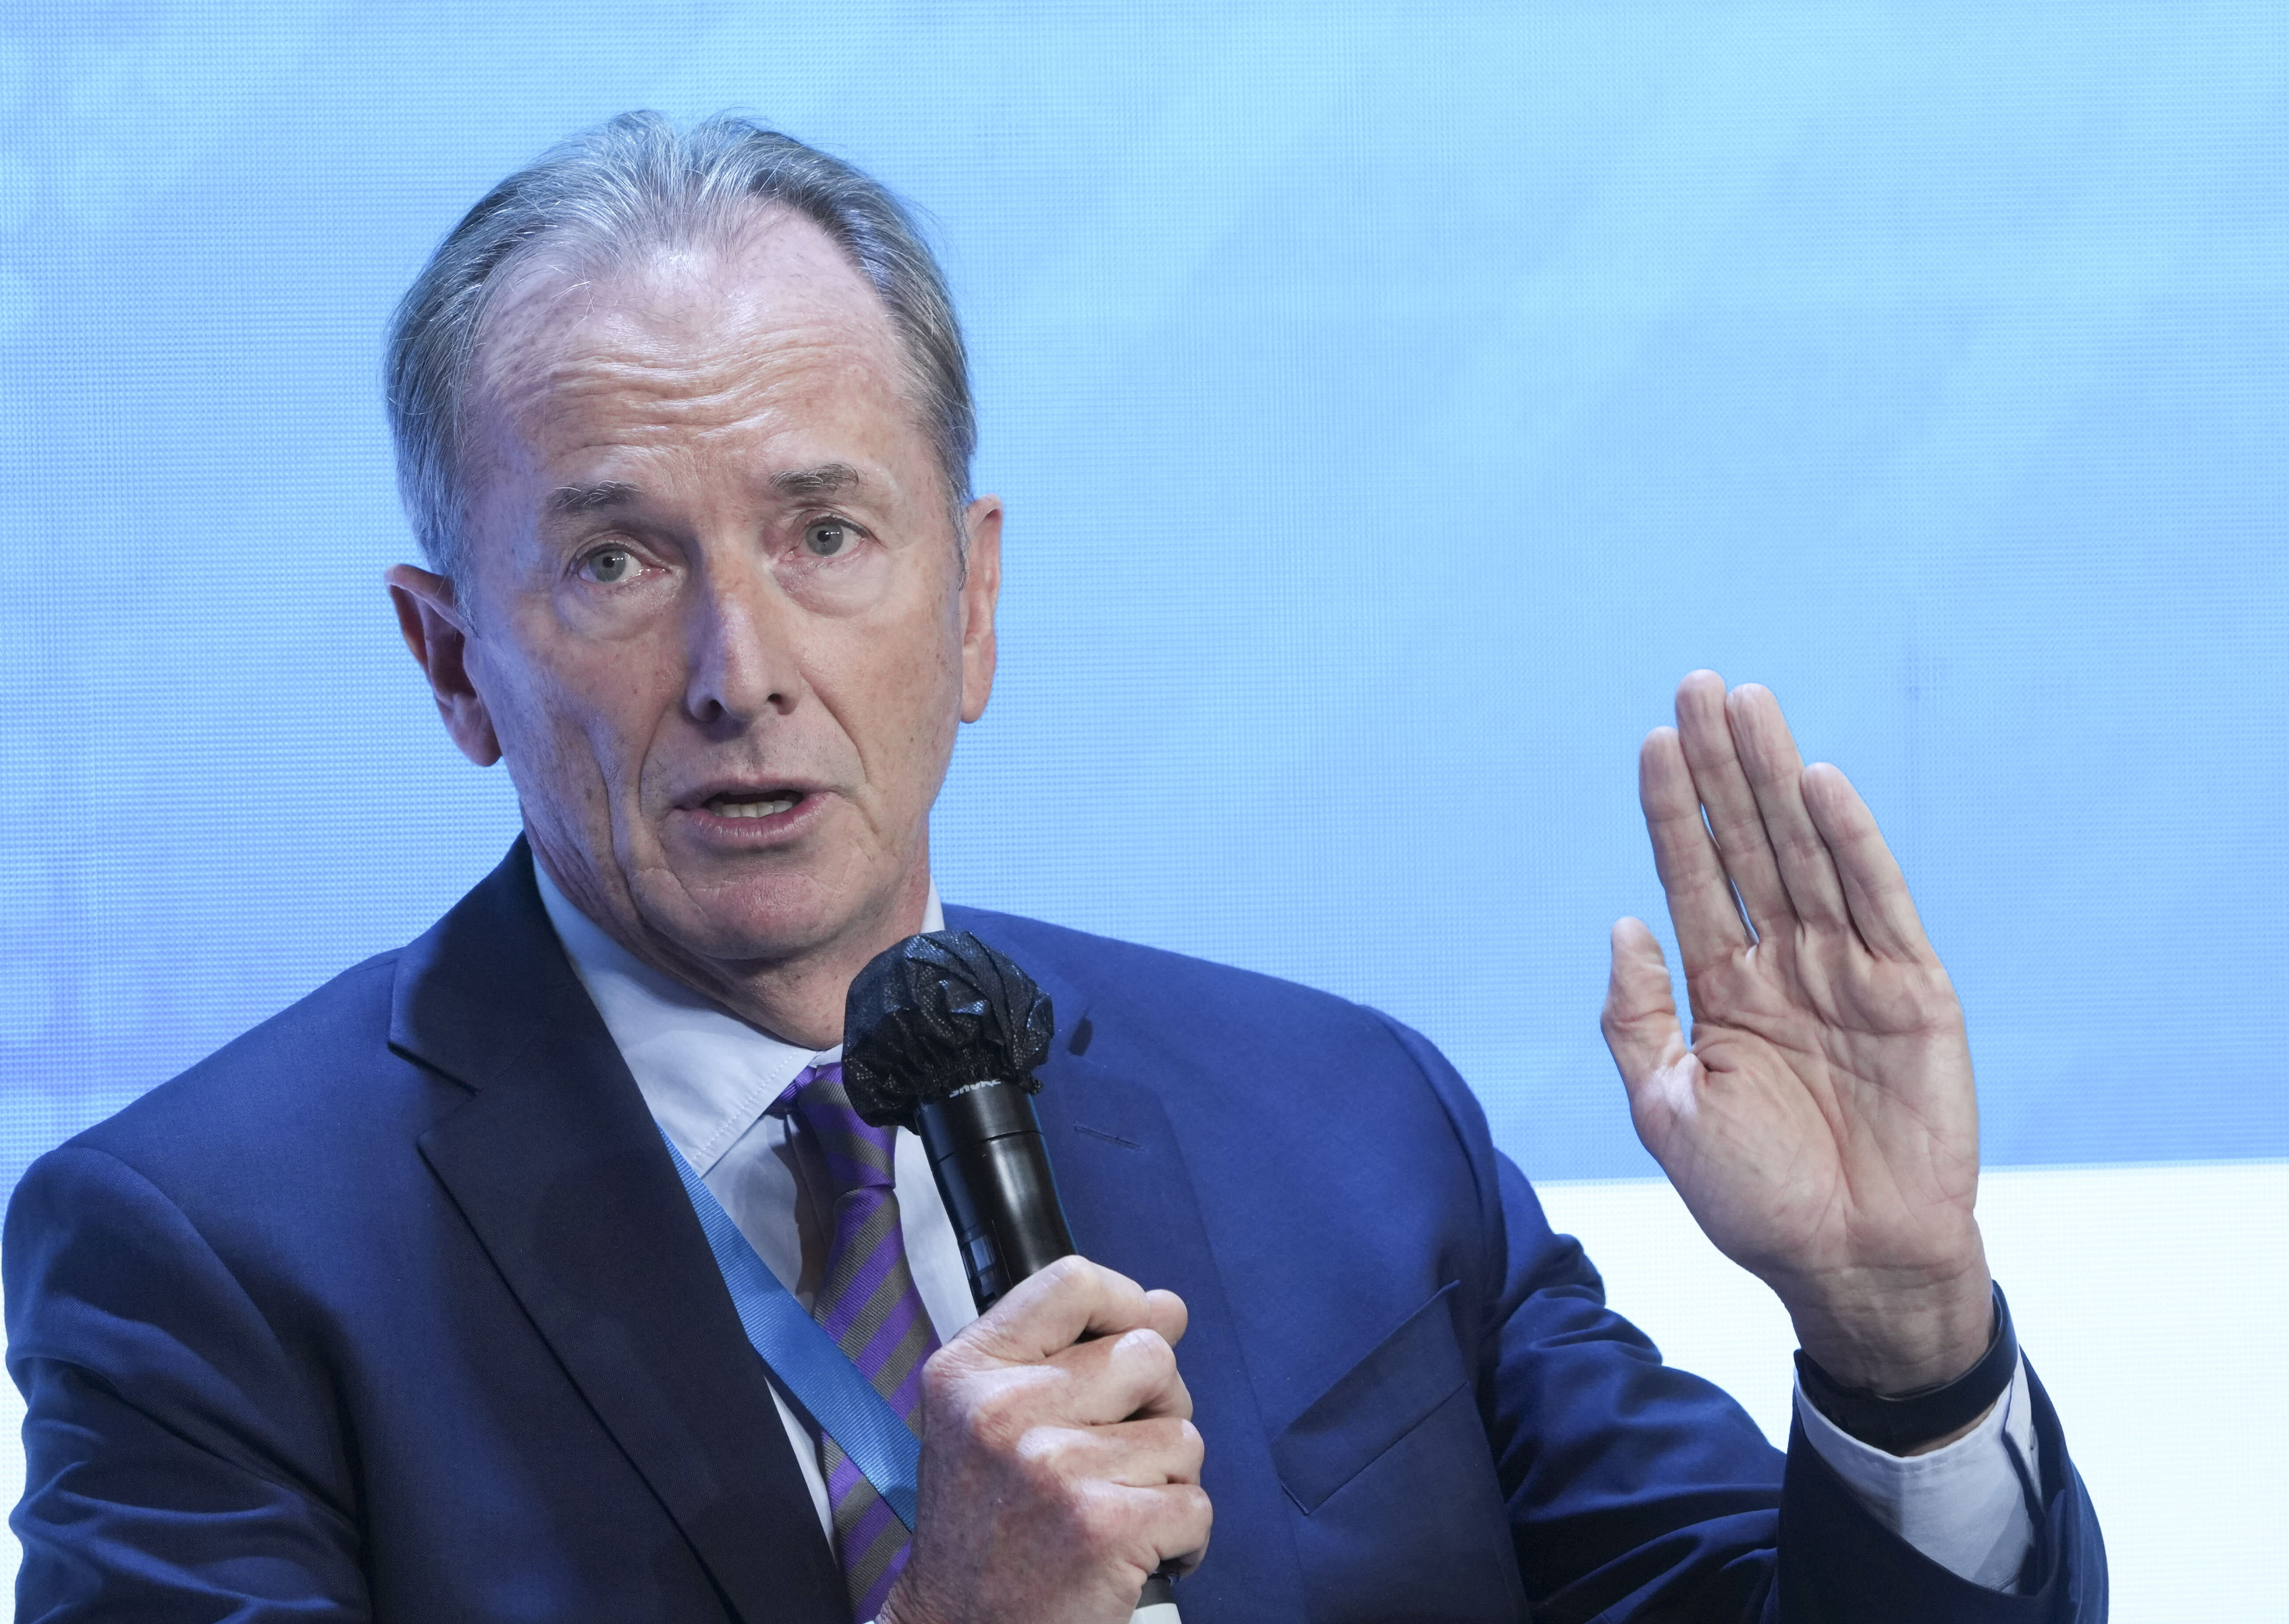 James Gorman, chairman and CEO of Morgan Stanley, speaks at the Global Financial Leaders’ Investment Summit in Hong Kong on Wednesday. Photo: Sam Tsang